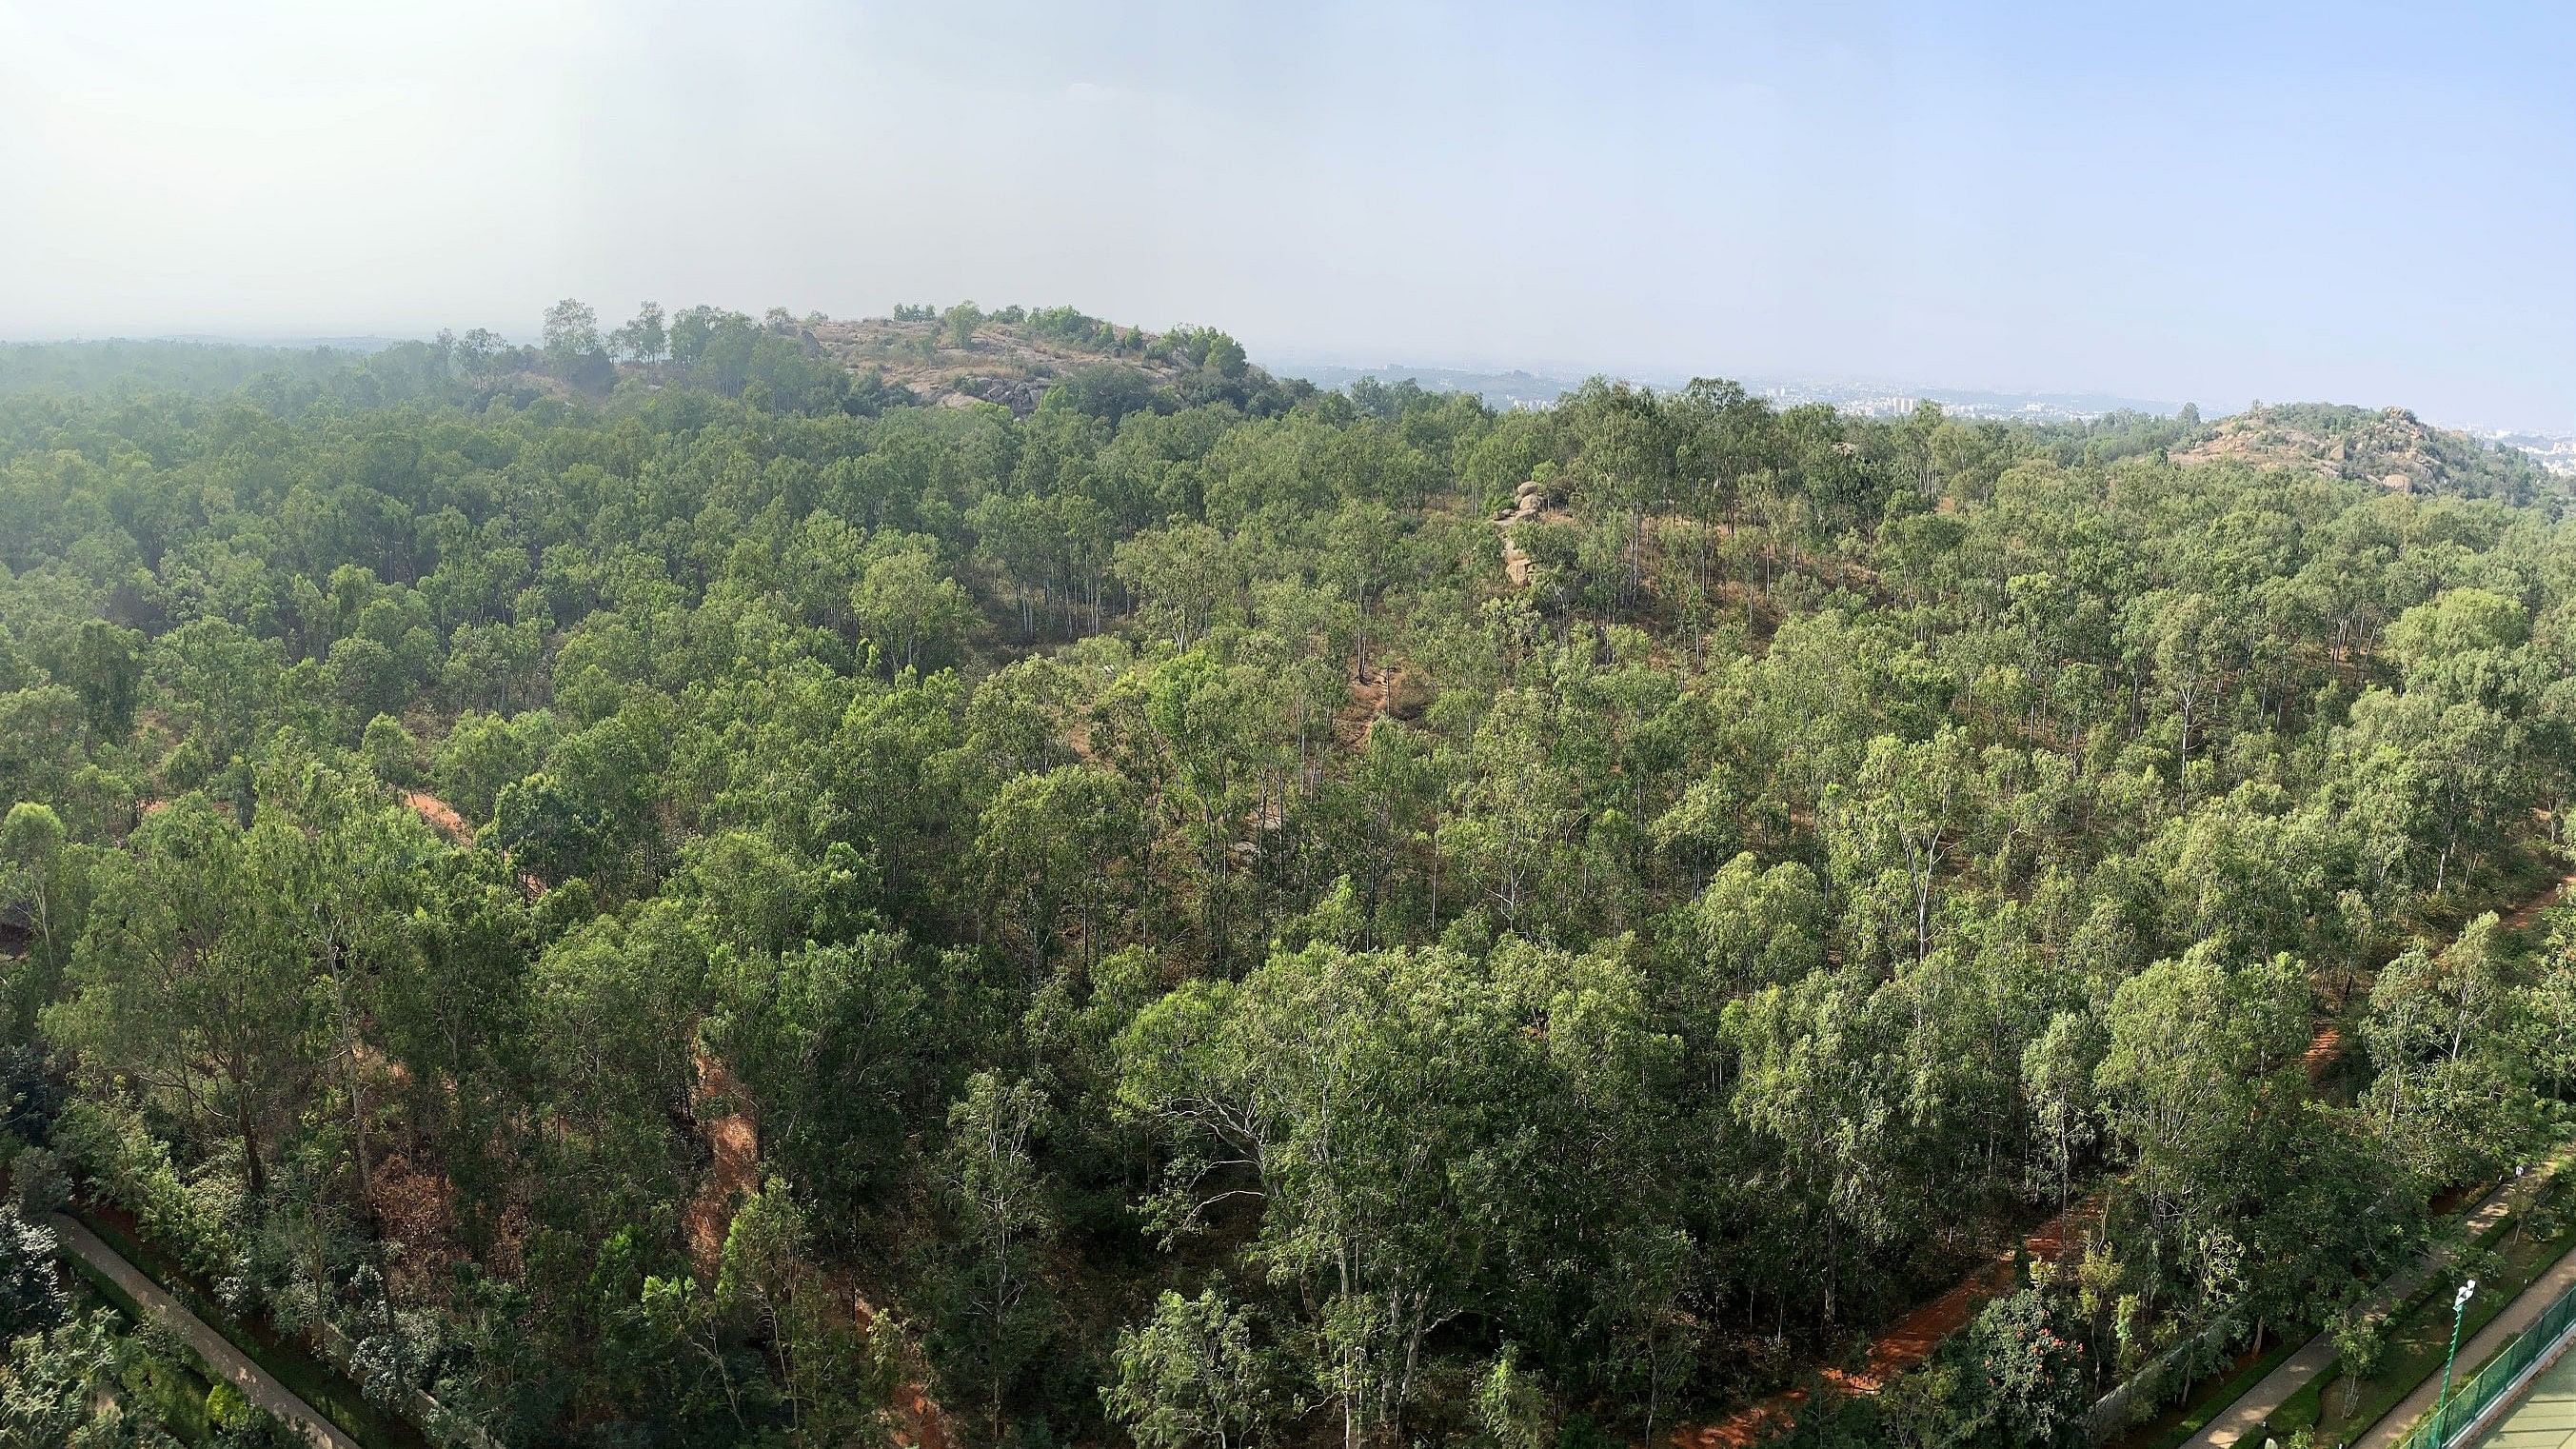 <div class="paragraphs"><p>The 17-acre 34-gunta land was classified as forest in June 2006, according to the order of the deputy commissioner, Bengaluru Urban. However, even as the department took up afforestation work, it had to fight a legal battle to secure full ownership of the land.</p></div>